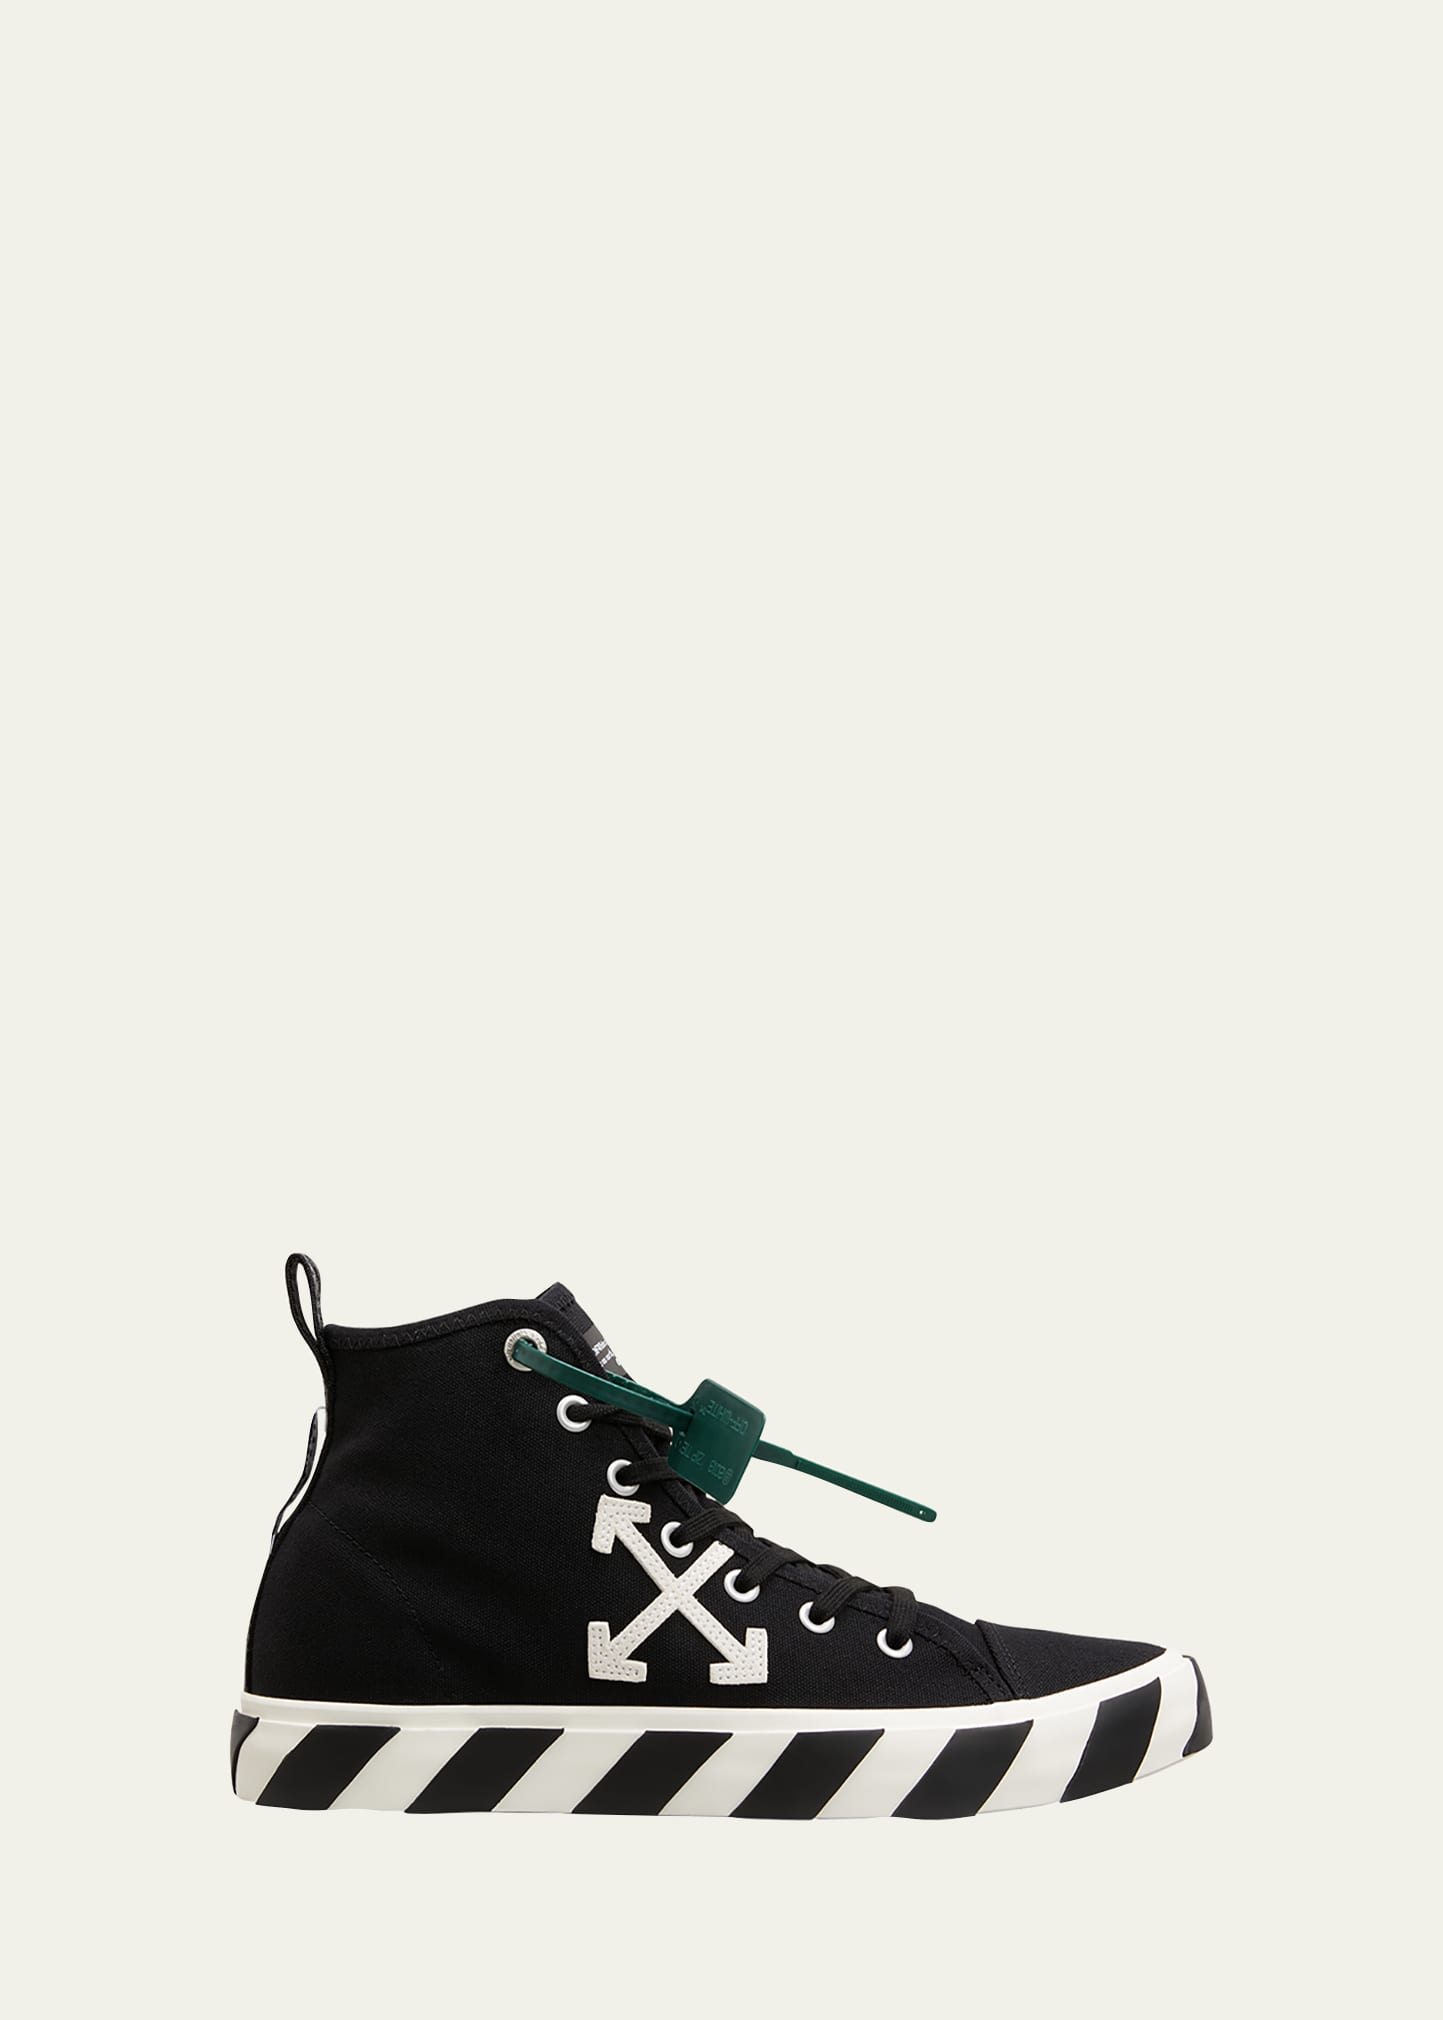 enorm Motley Fortrolig Off-White Men's Arrow Striped Canvas Mid-Top Sneakers - Bergdorf Goodman